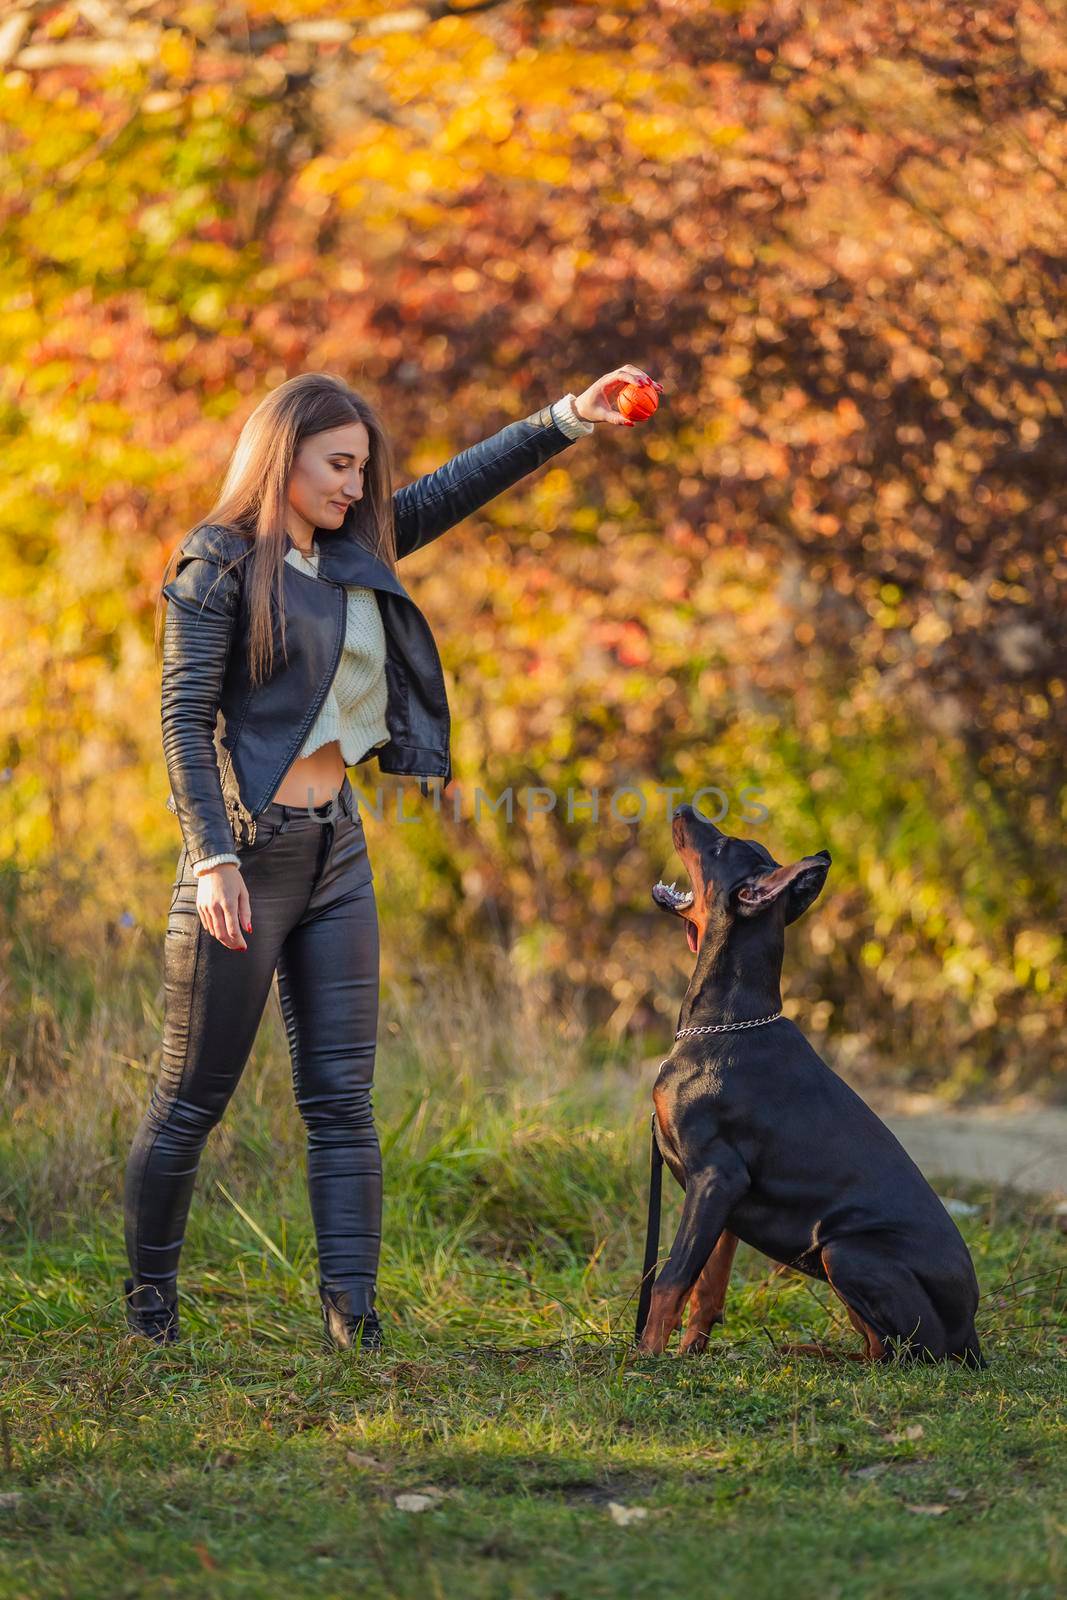 girl plays with a Doberman dog with a ball